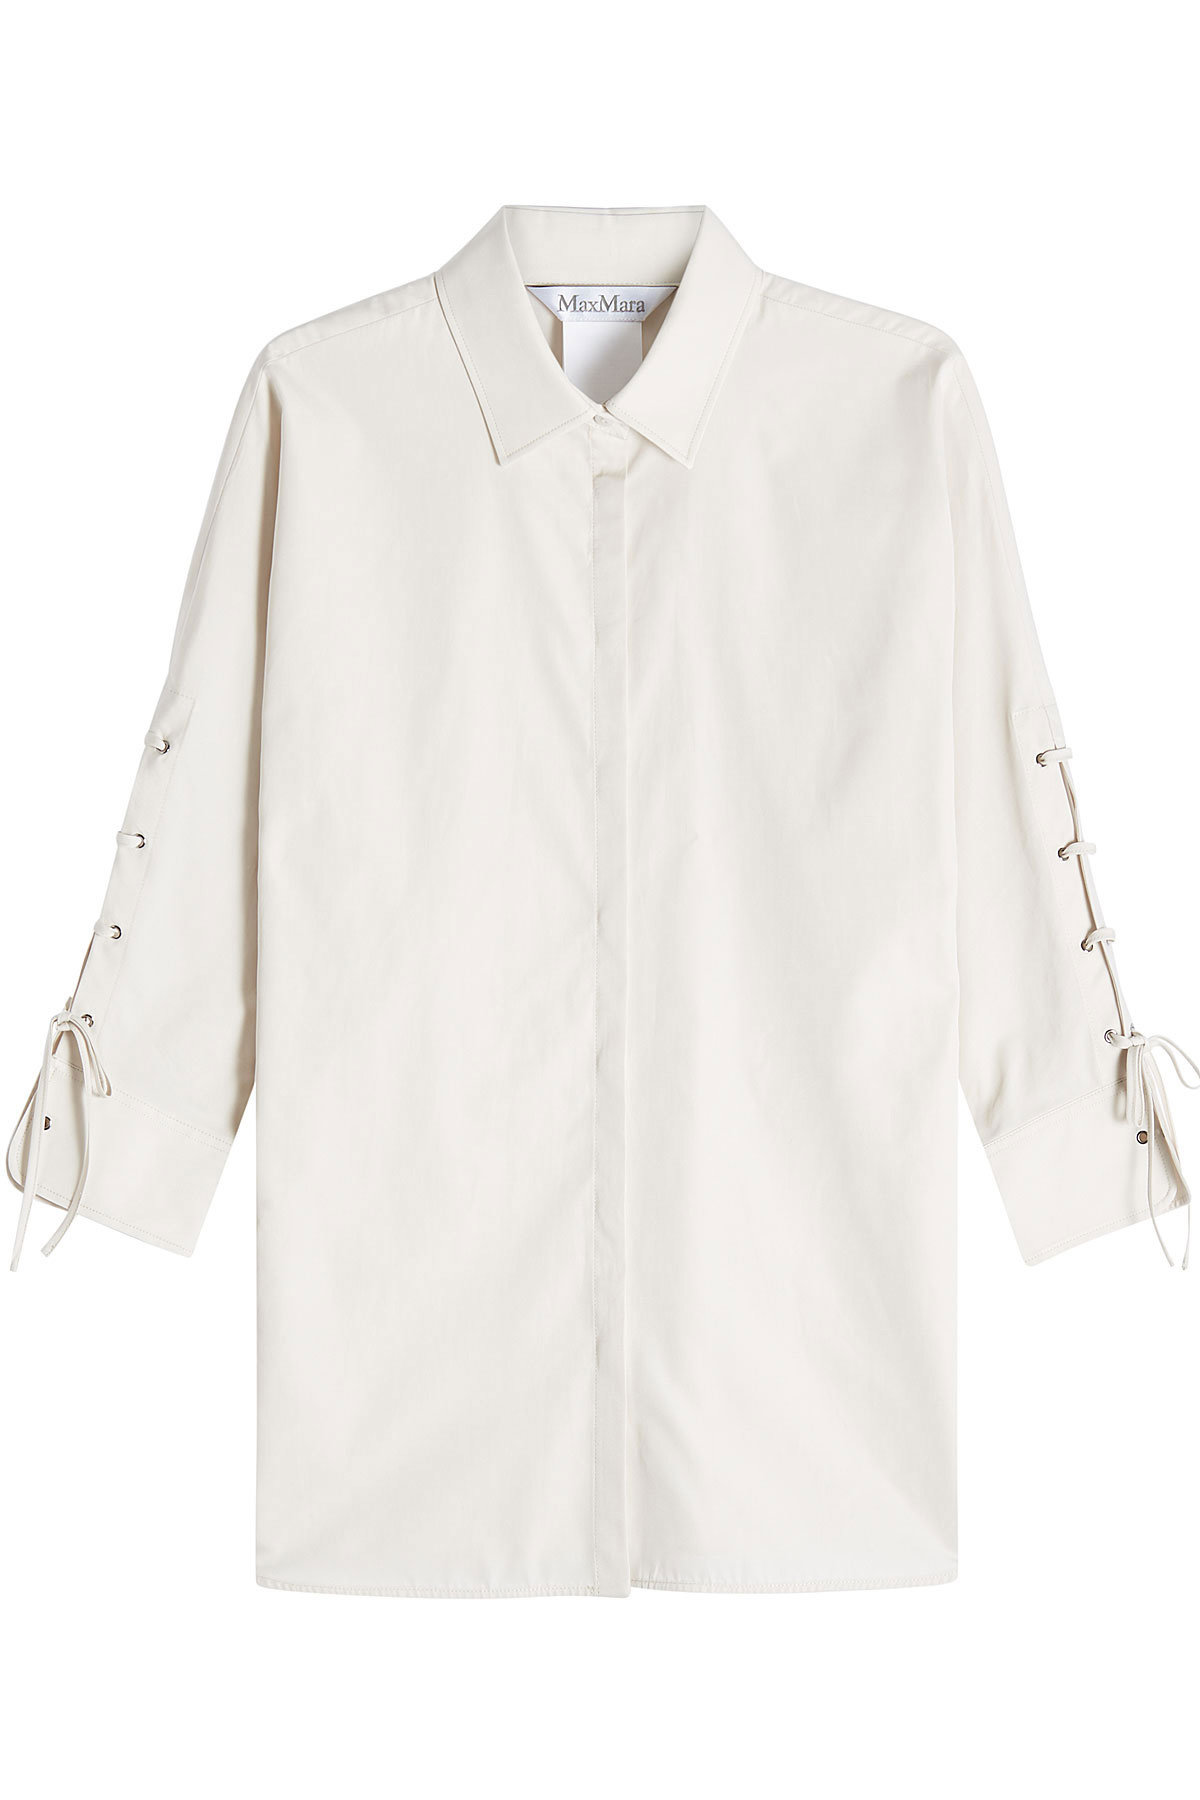 Max Mara - Cotton Shirt with Lace-Up Sleeves